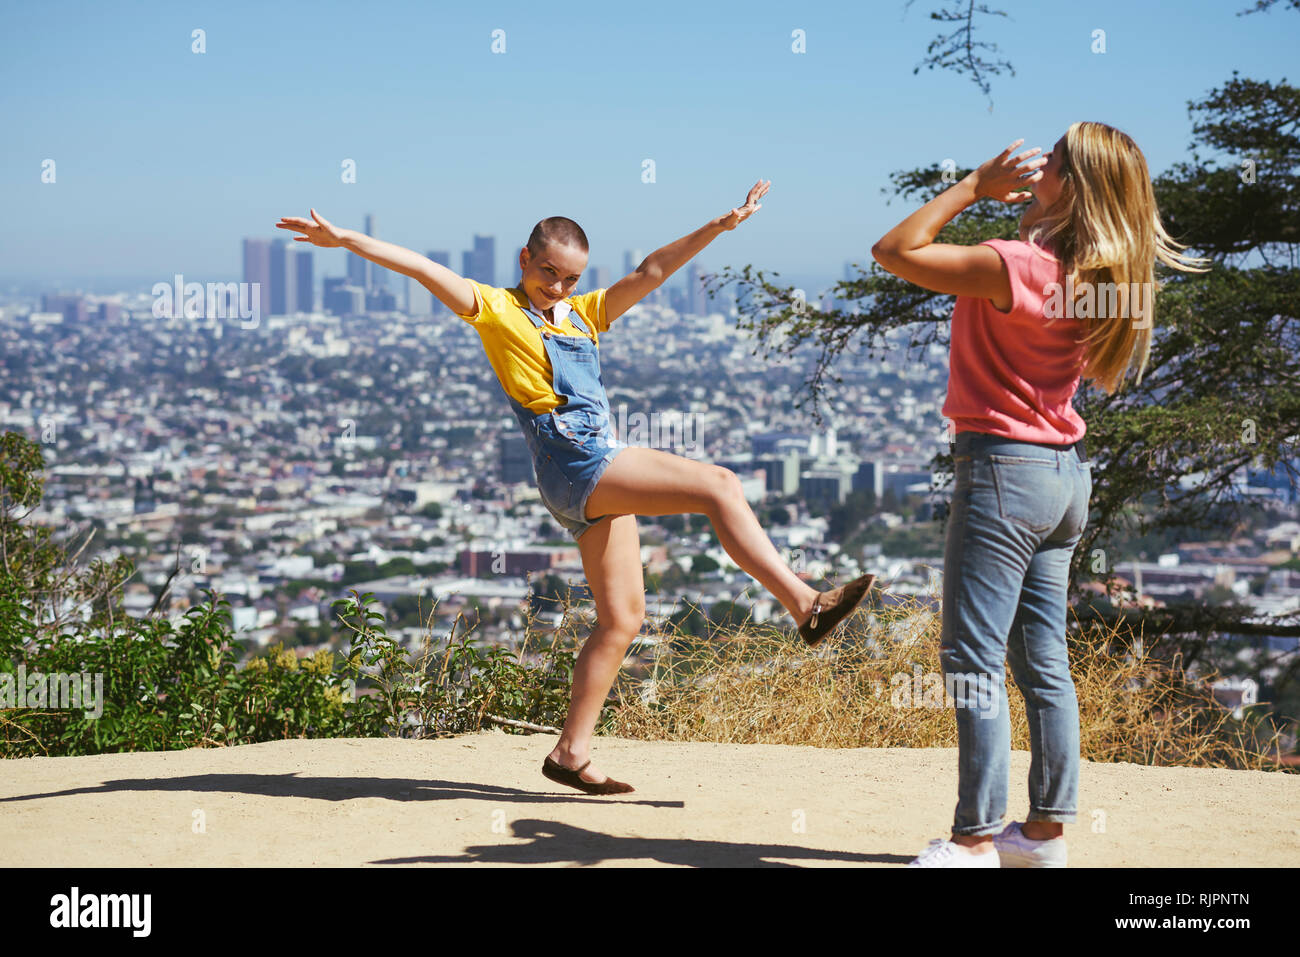 Two young female friends having fun on cityscape hilltop, Los Angeles, California, USA Stock Photo